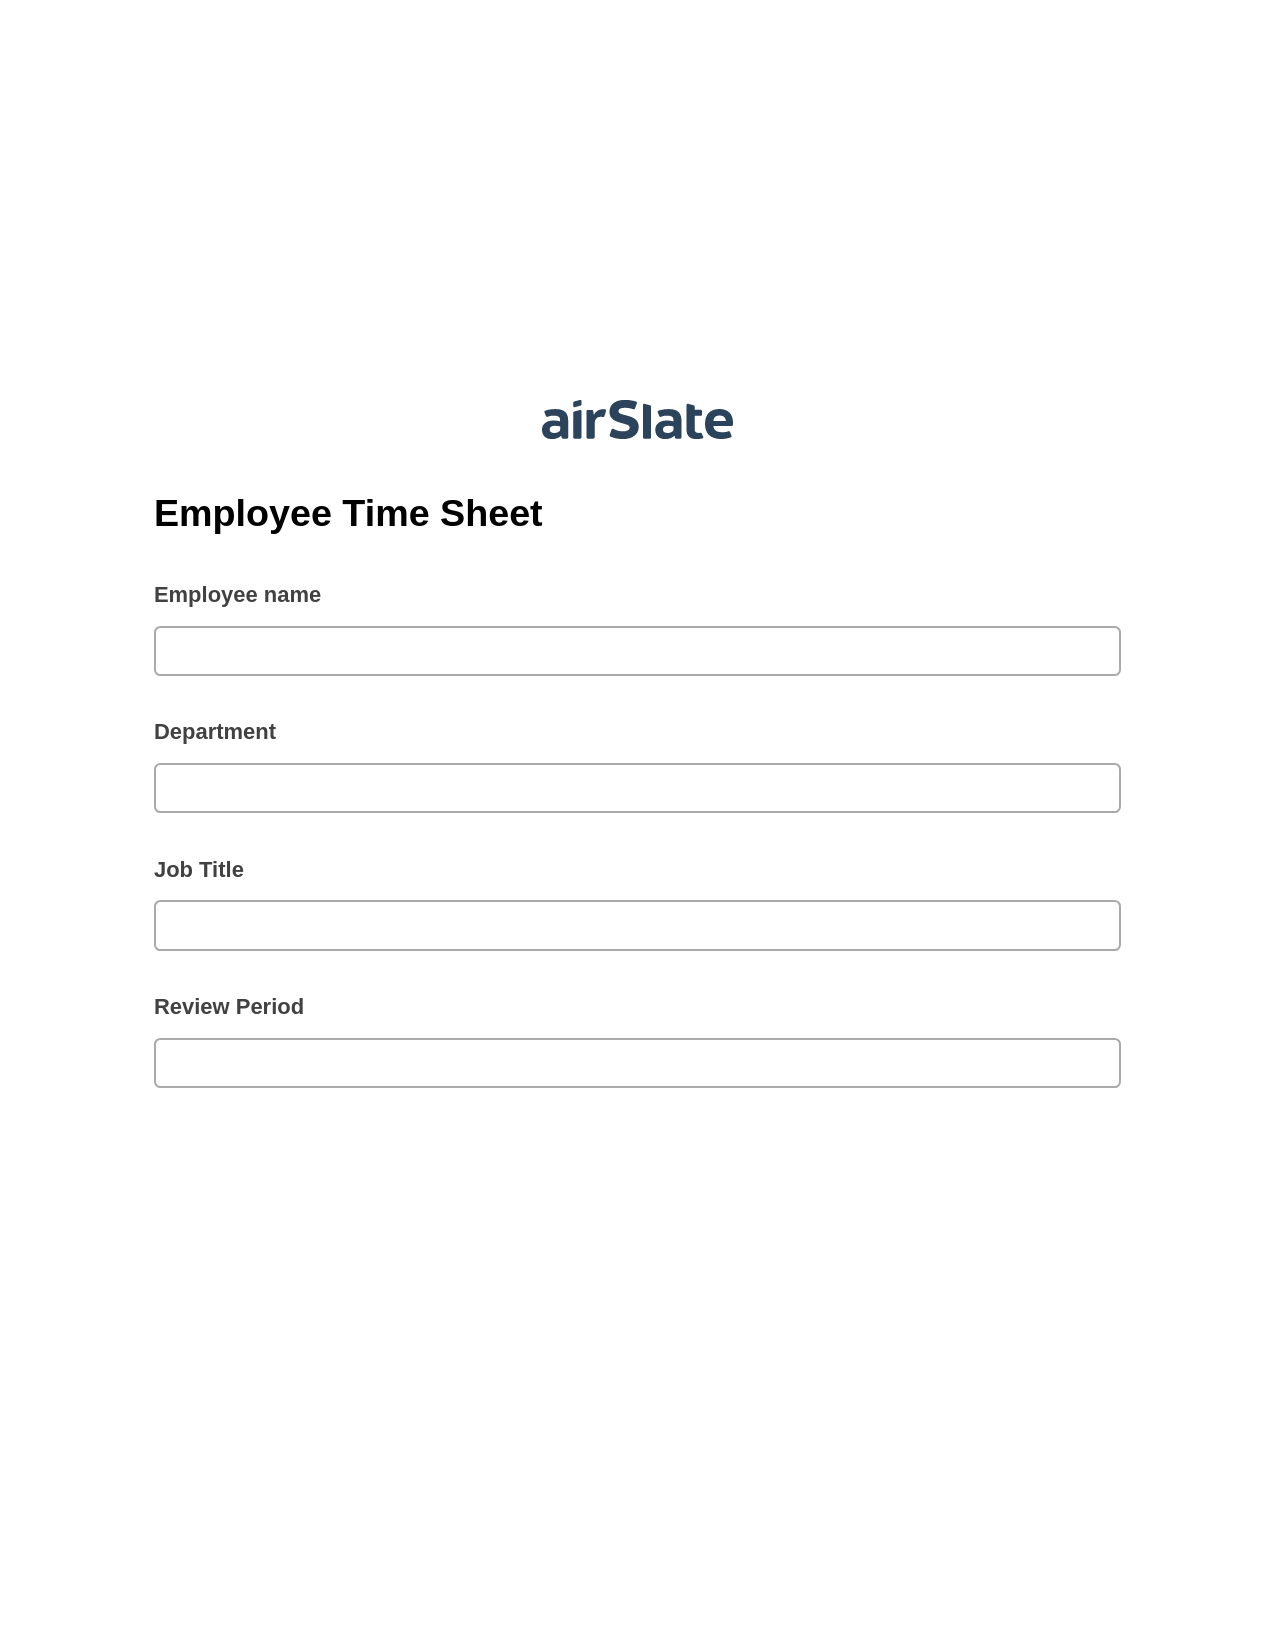 Multirole Employee Time Sheet Pre-fill from Salesforce Records Bot, Create slate addon, Export to NetSuite Bot